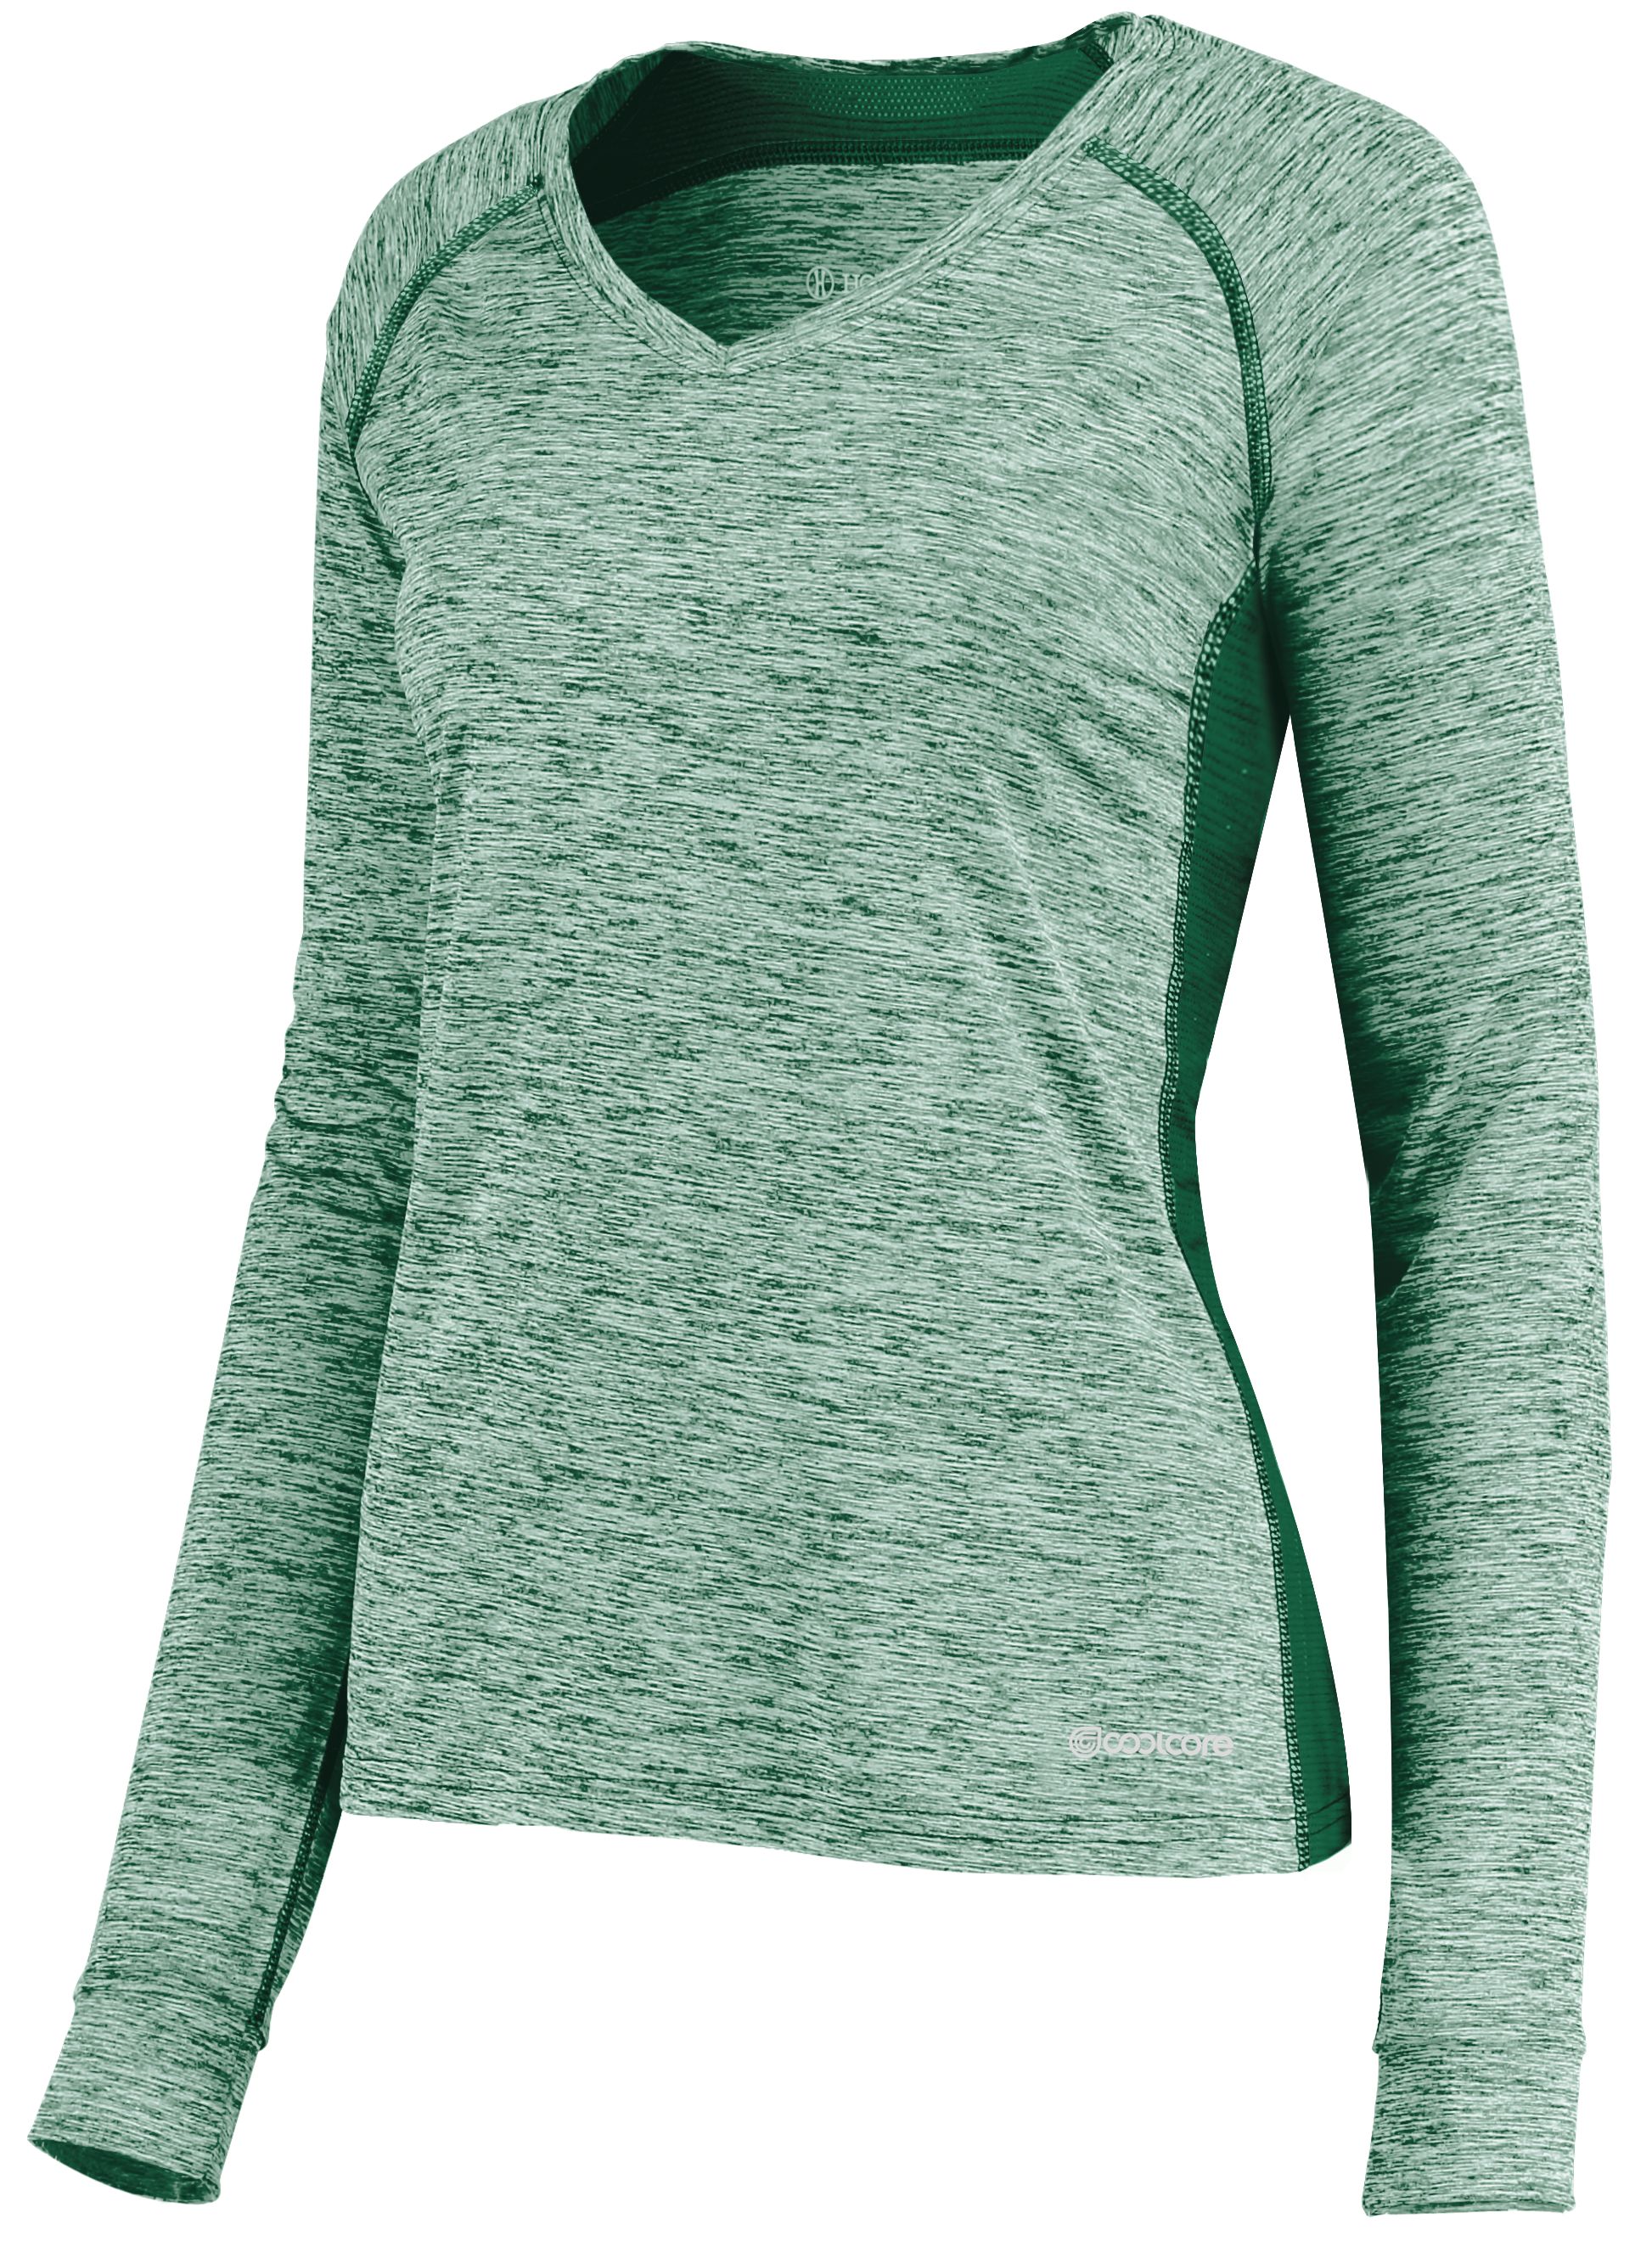 Selected Color is Dark Green Heather